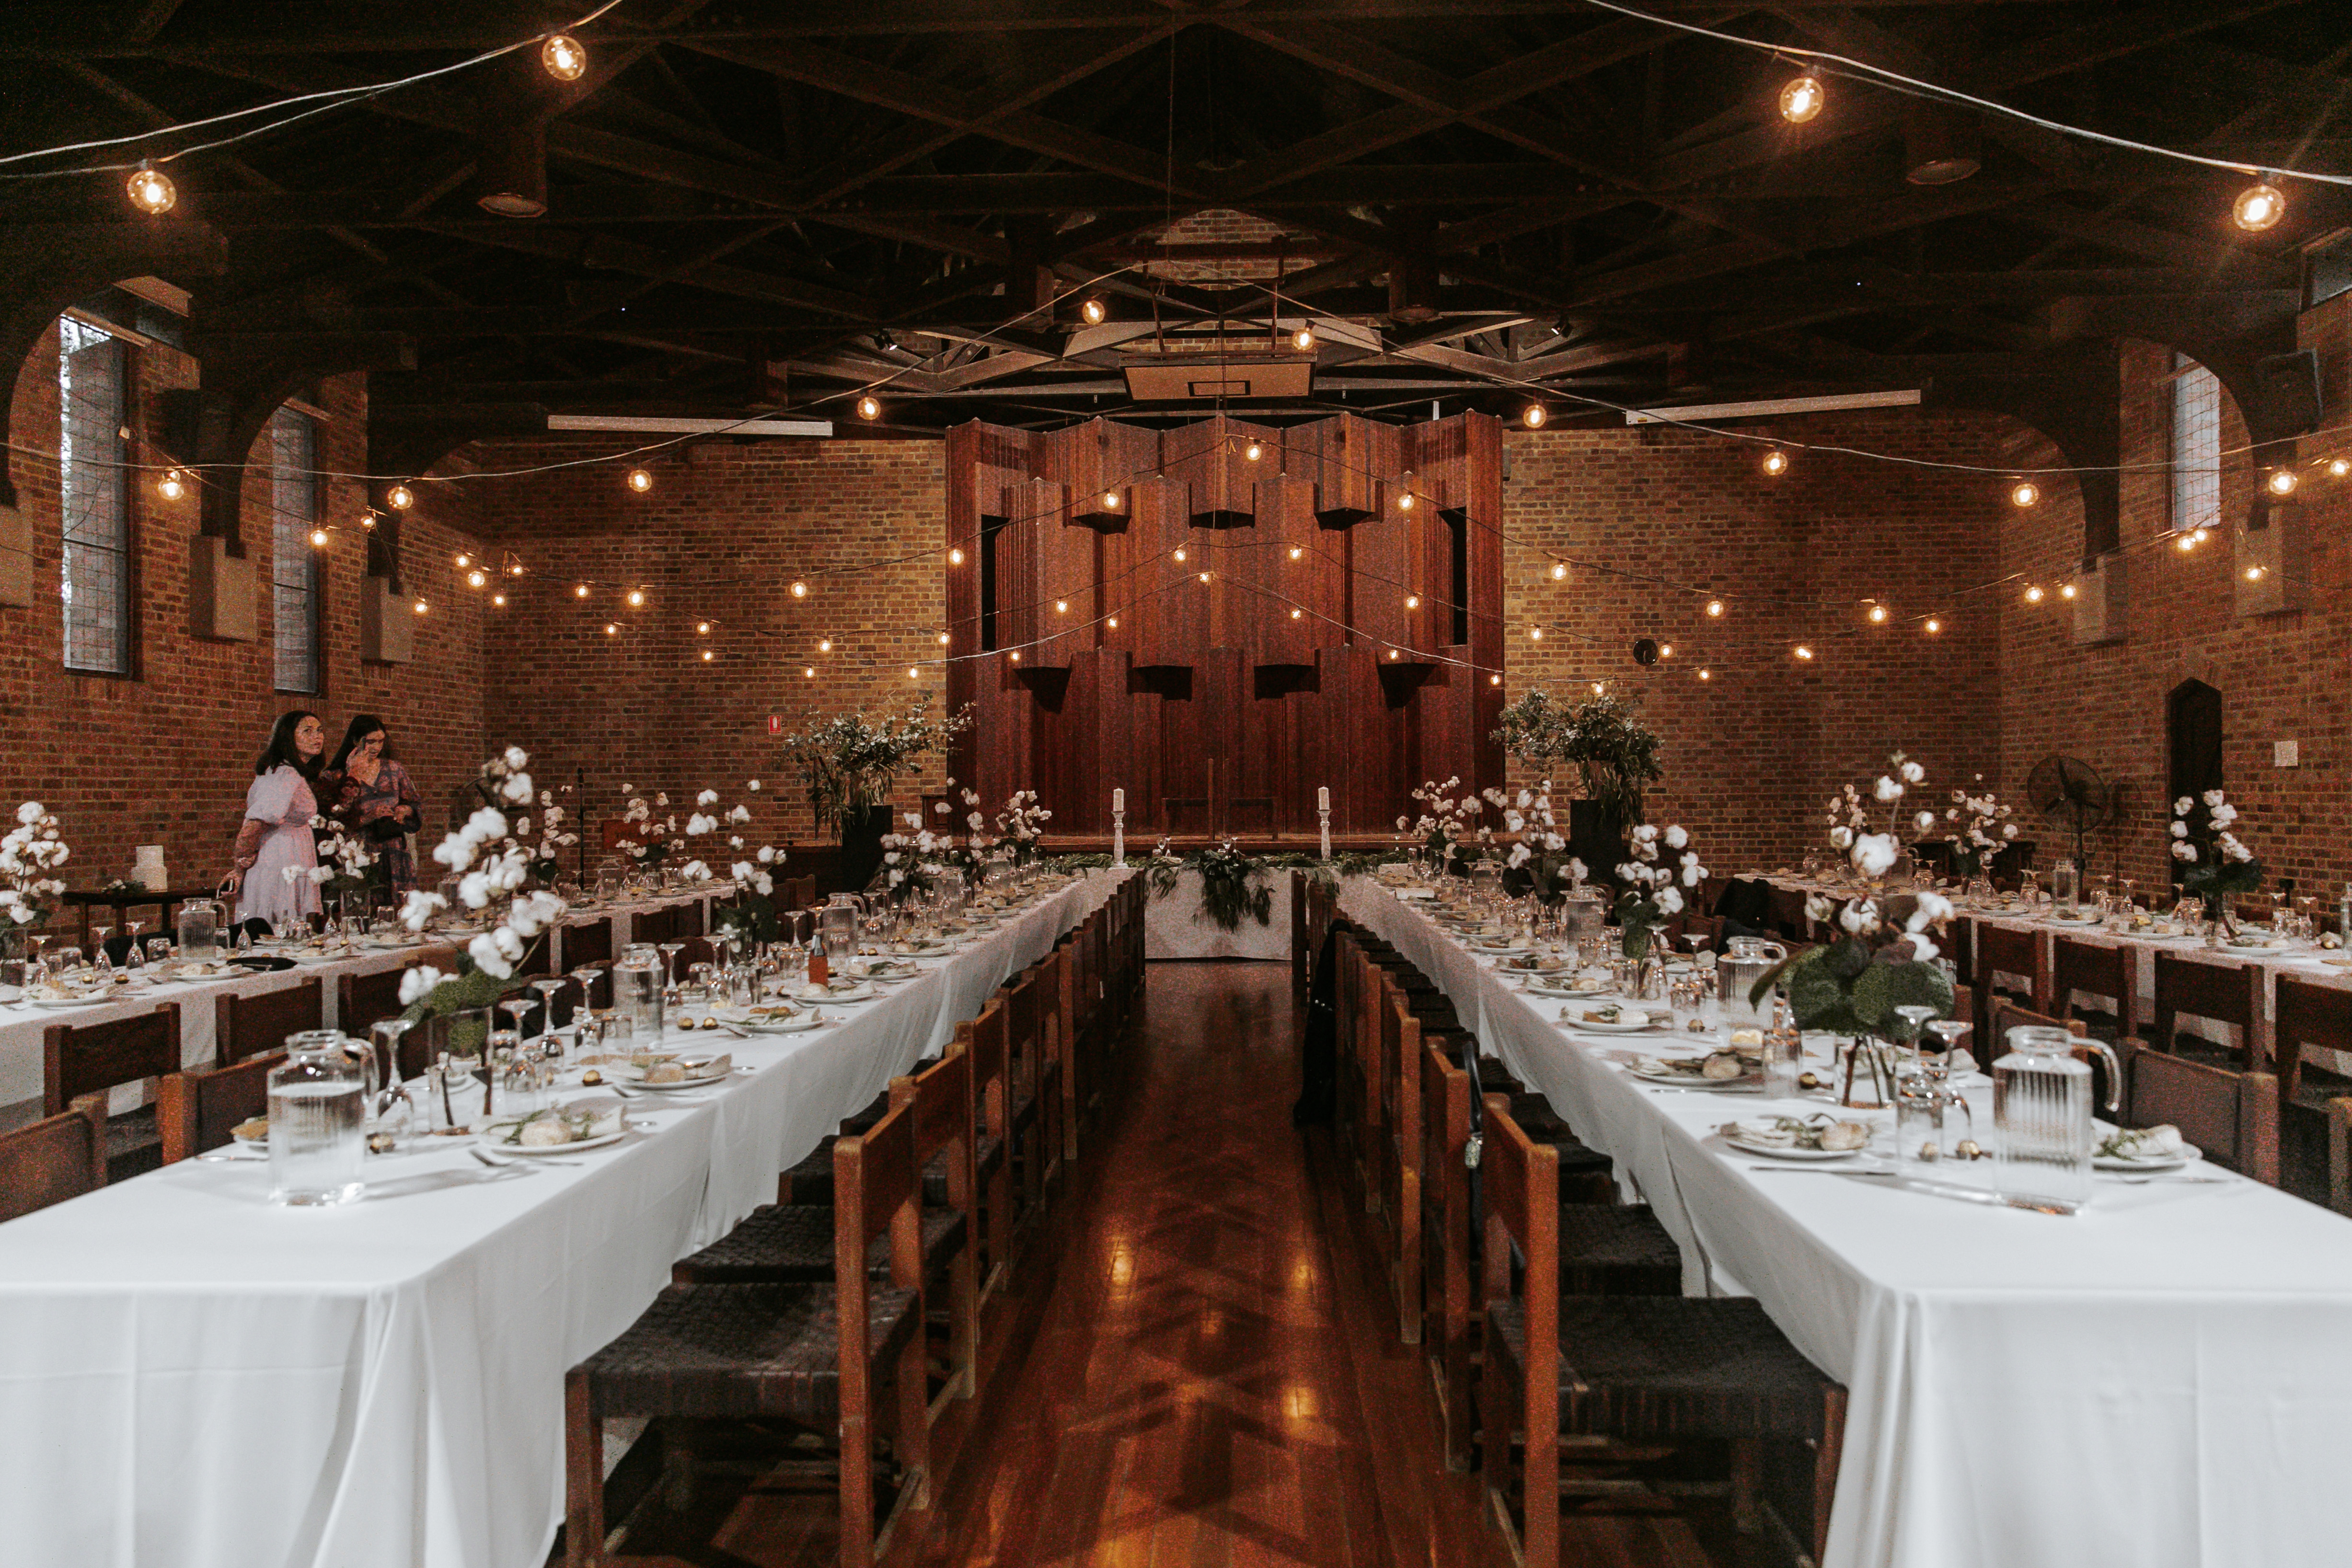 Hall set with banquet tables and garland lights